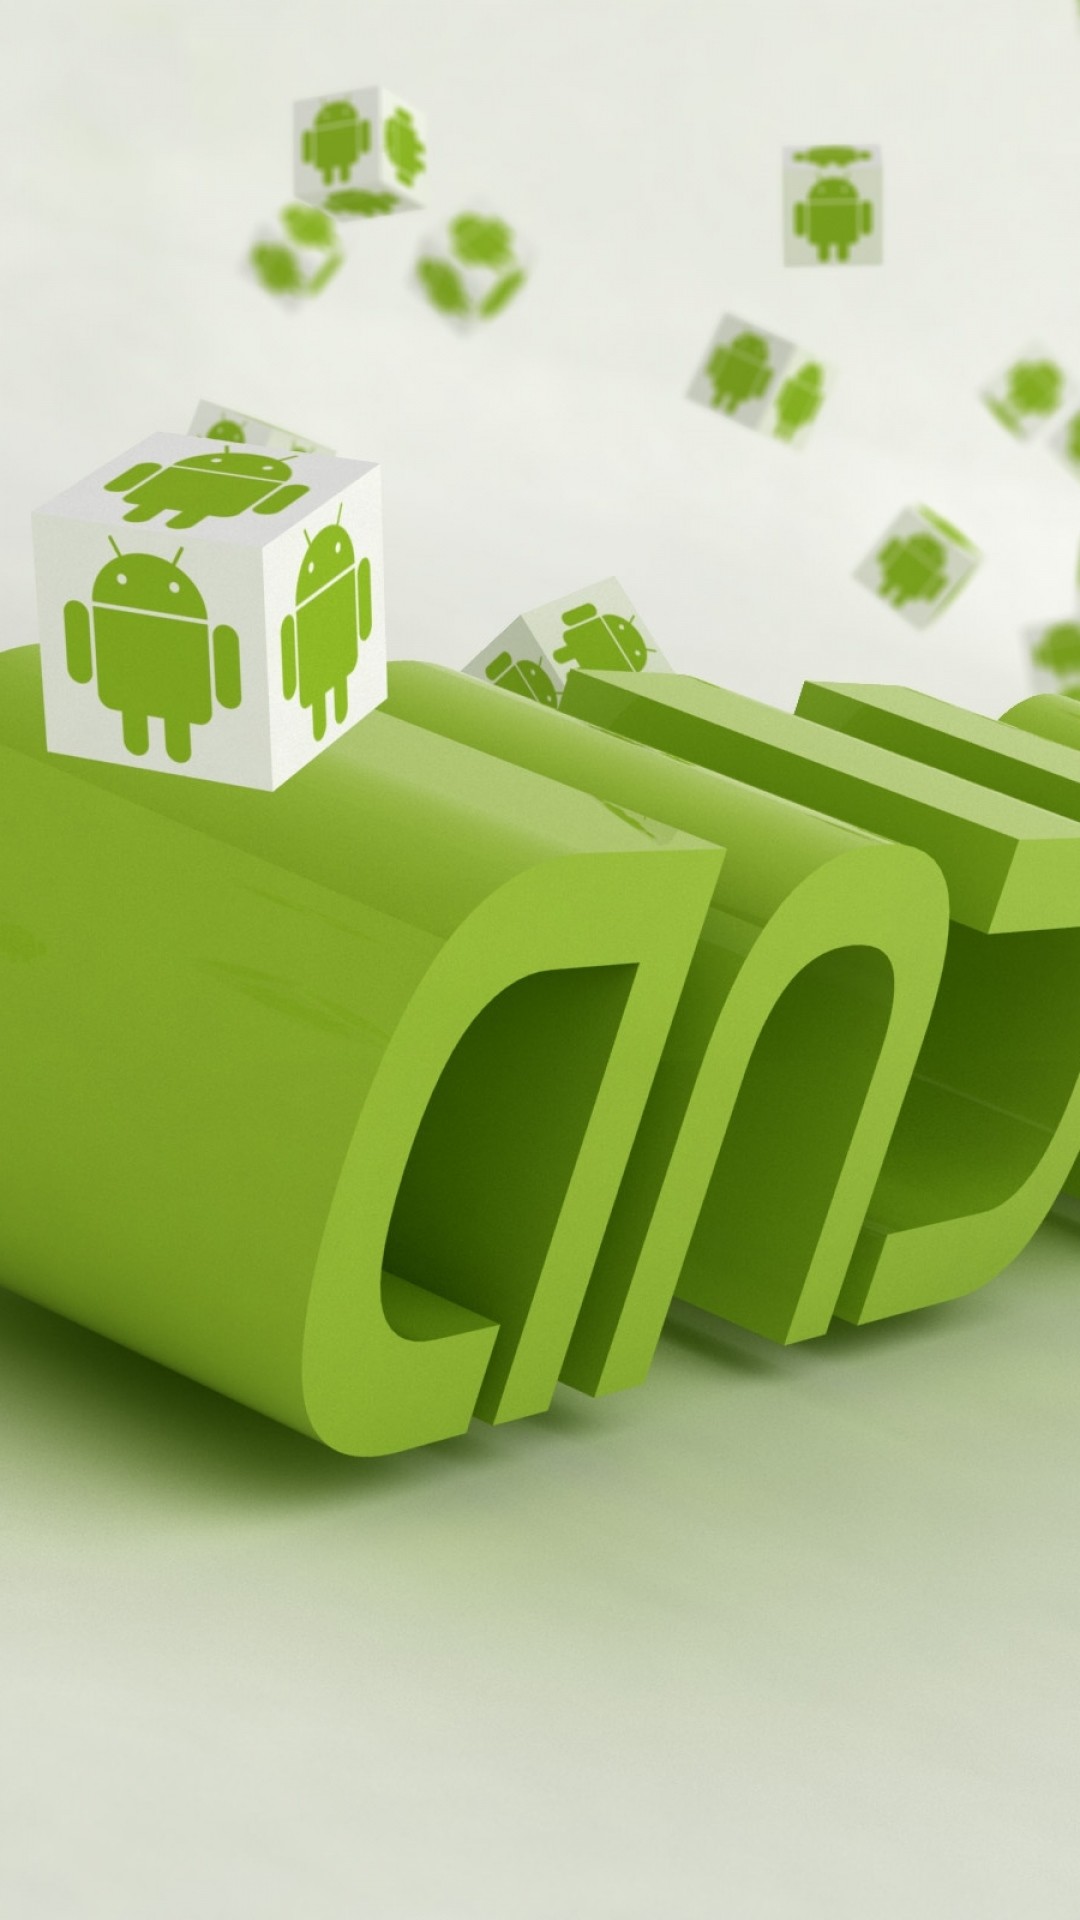 1080x1920  Wallpaper android, logo, green, white, robots, cubes